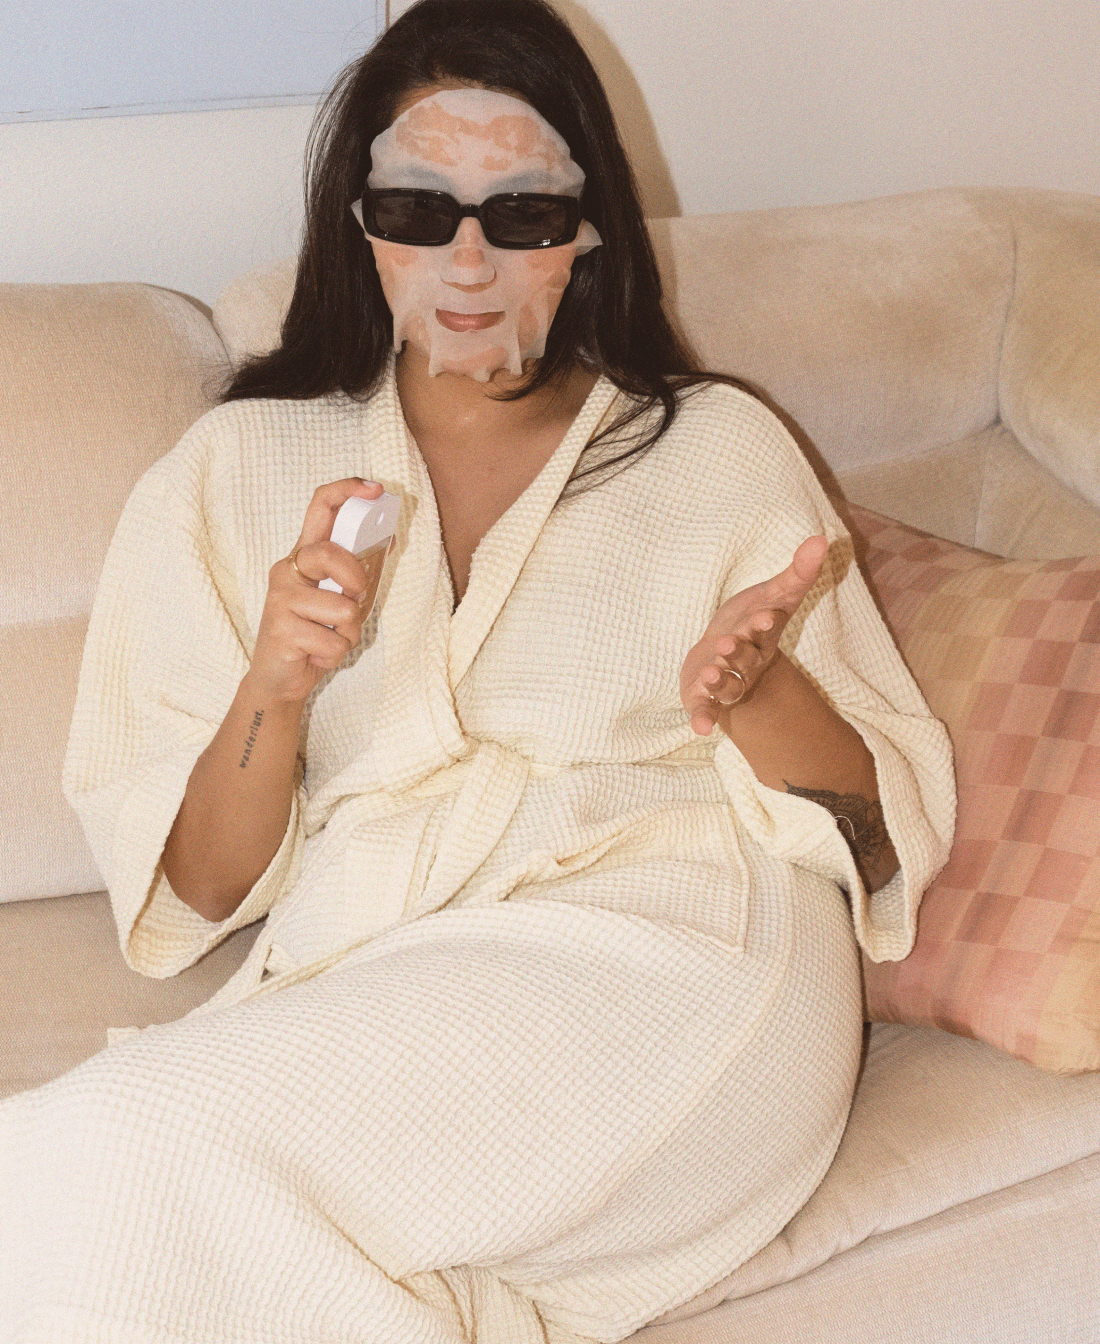 A woman using our Velvet Peach Touchland with a face mask and sunglasses on.